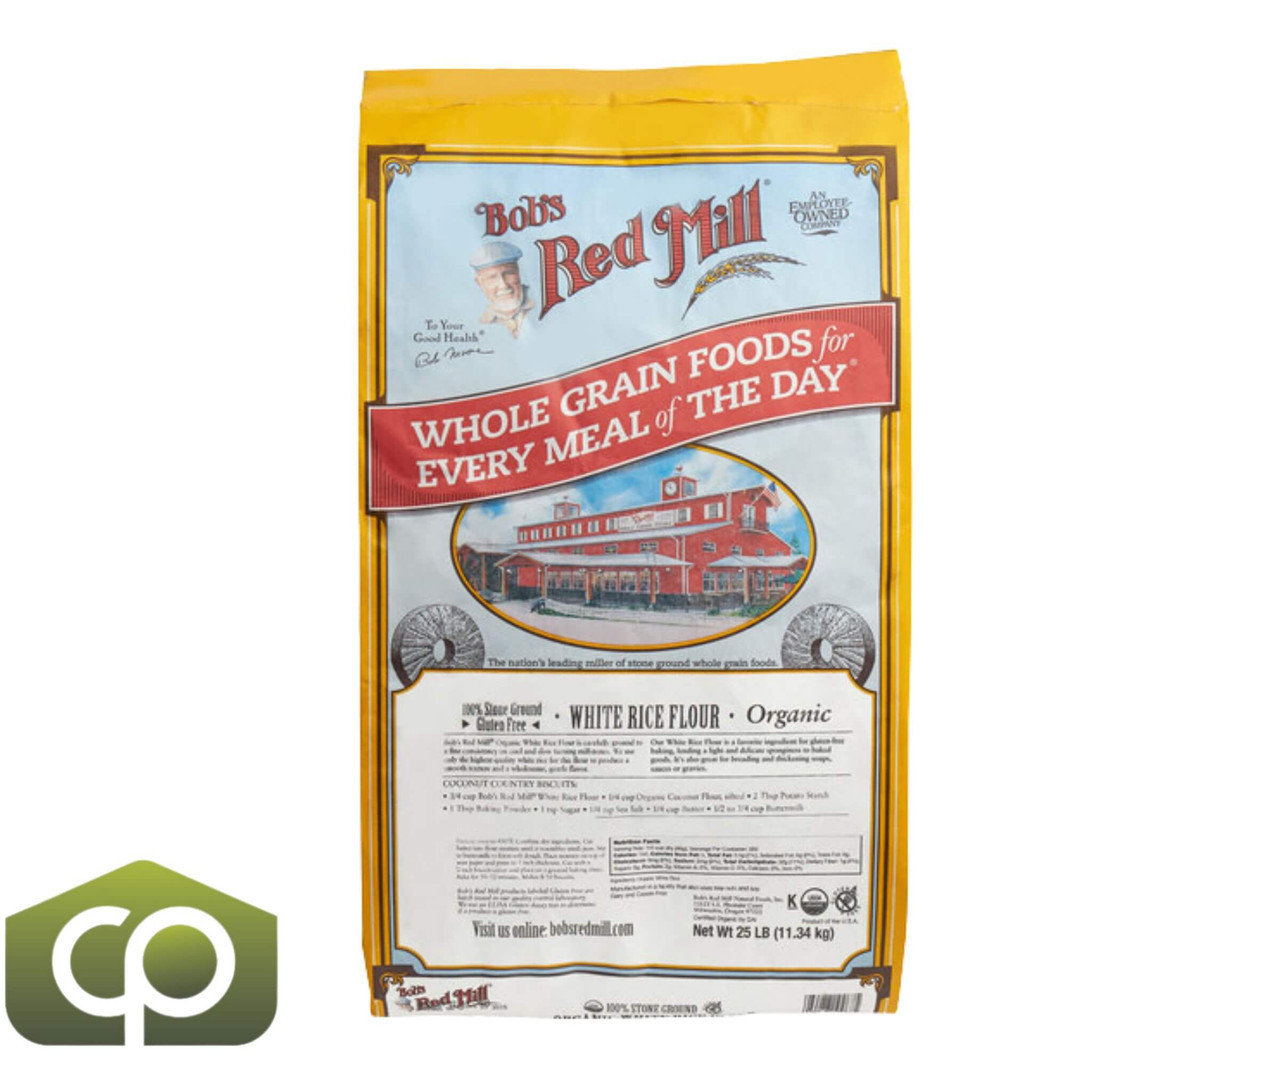 Bob's Red Mill 25 lbs. (11.34 kg) Gluten-Free Organic White Rice Flour (60 BAGS/PALLET) - Chicken Pieces